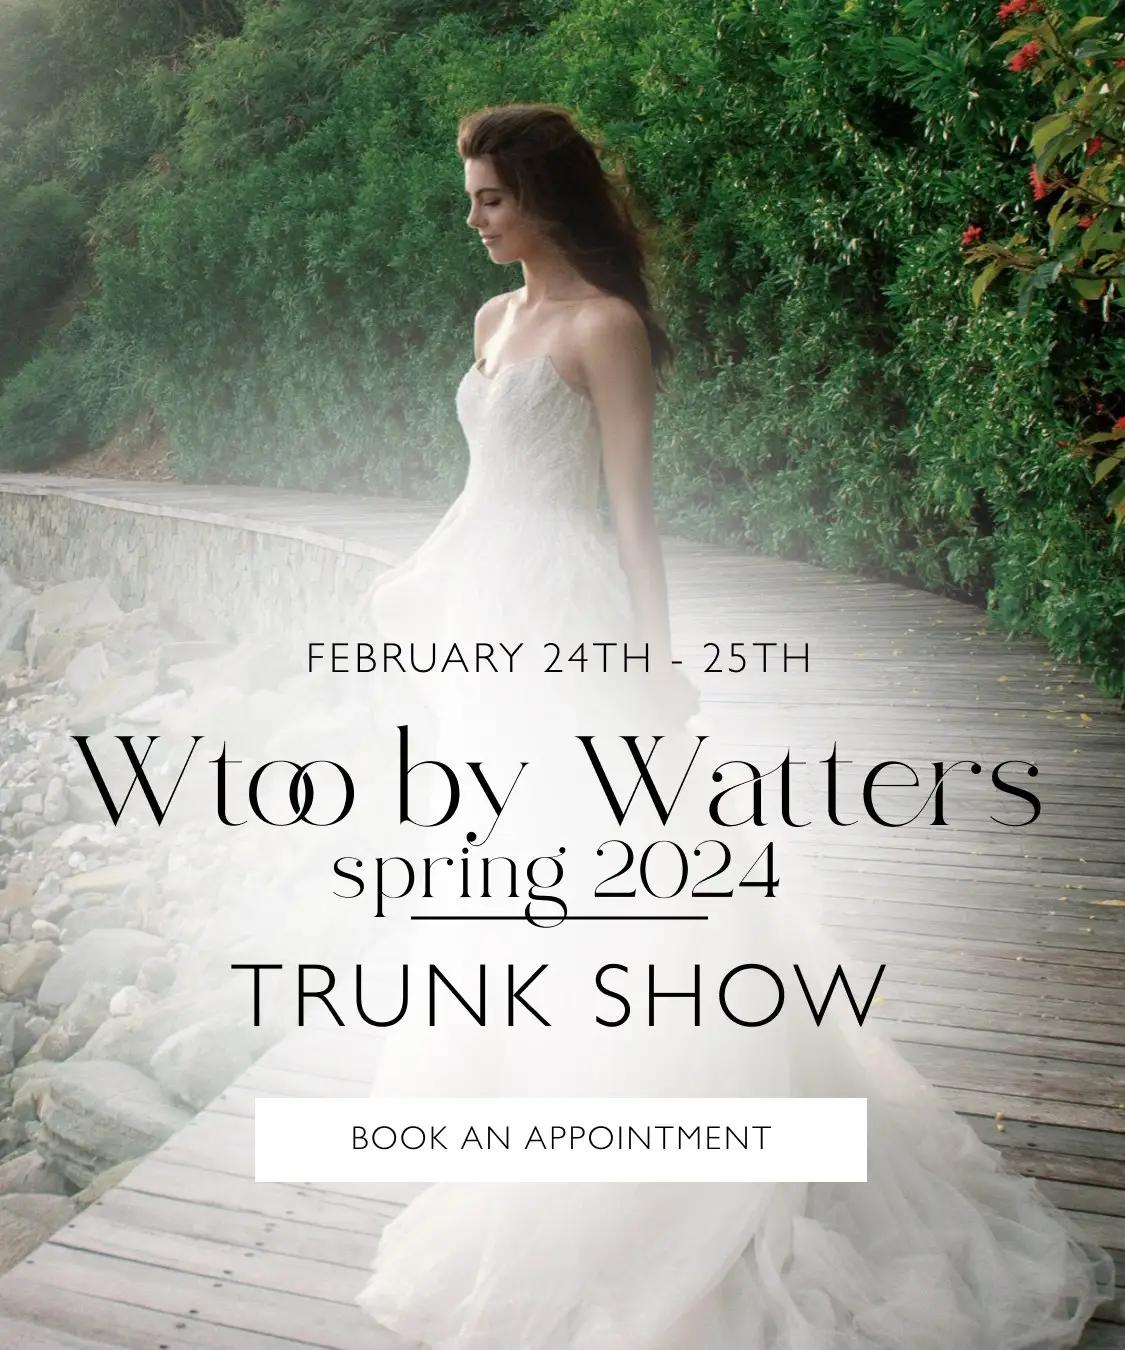 Wtoo by Watters Spring 2024 Trunk Show Banner Mobile